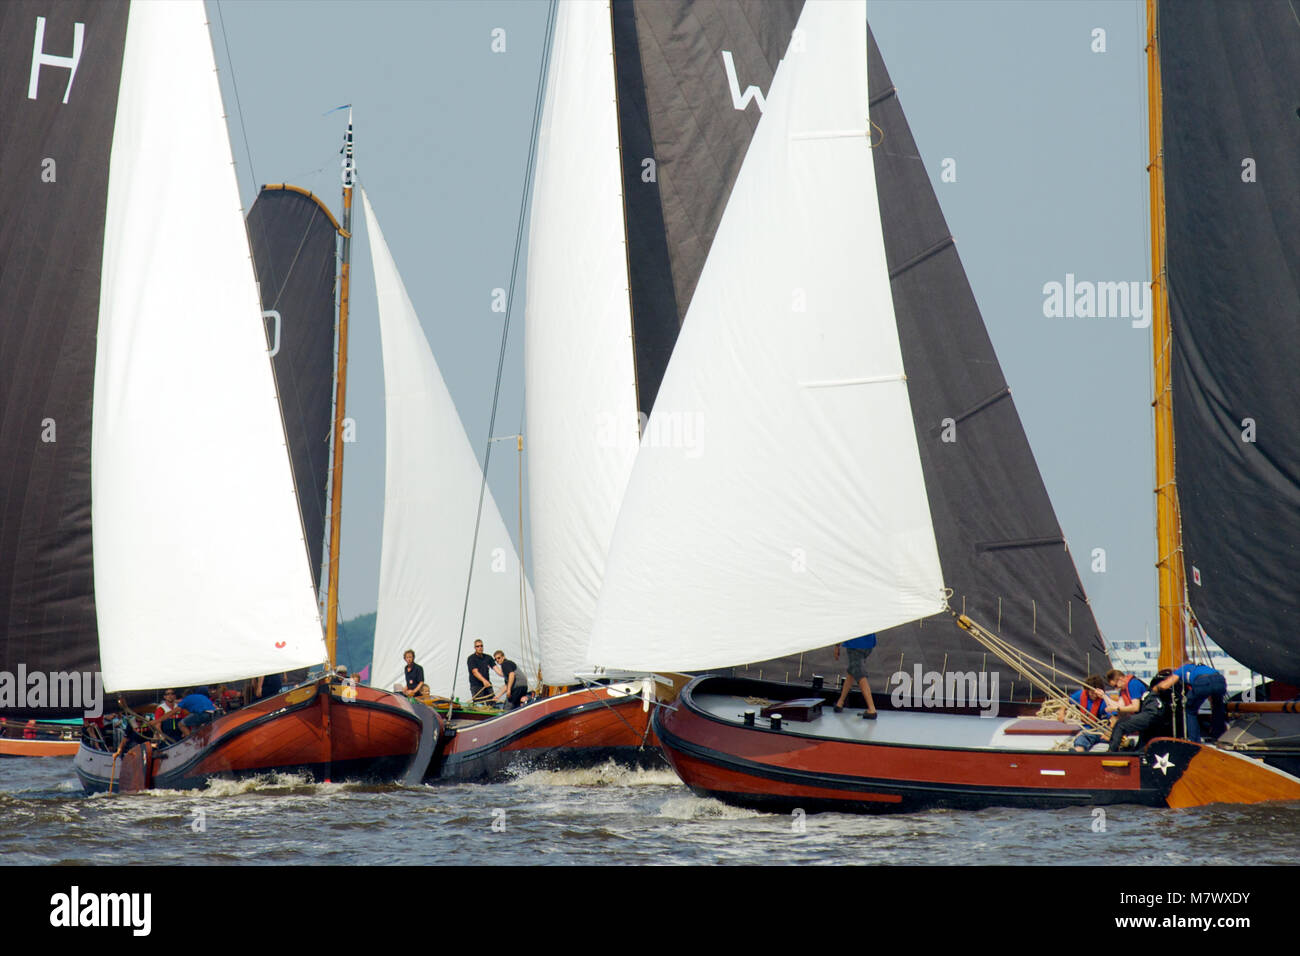 A traditional sailing race called skutsjesilen with classic Dutch wooden flat-bottemend boats on the lakes in Frisia, The Netherlands Stock Photo